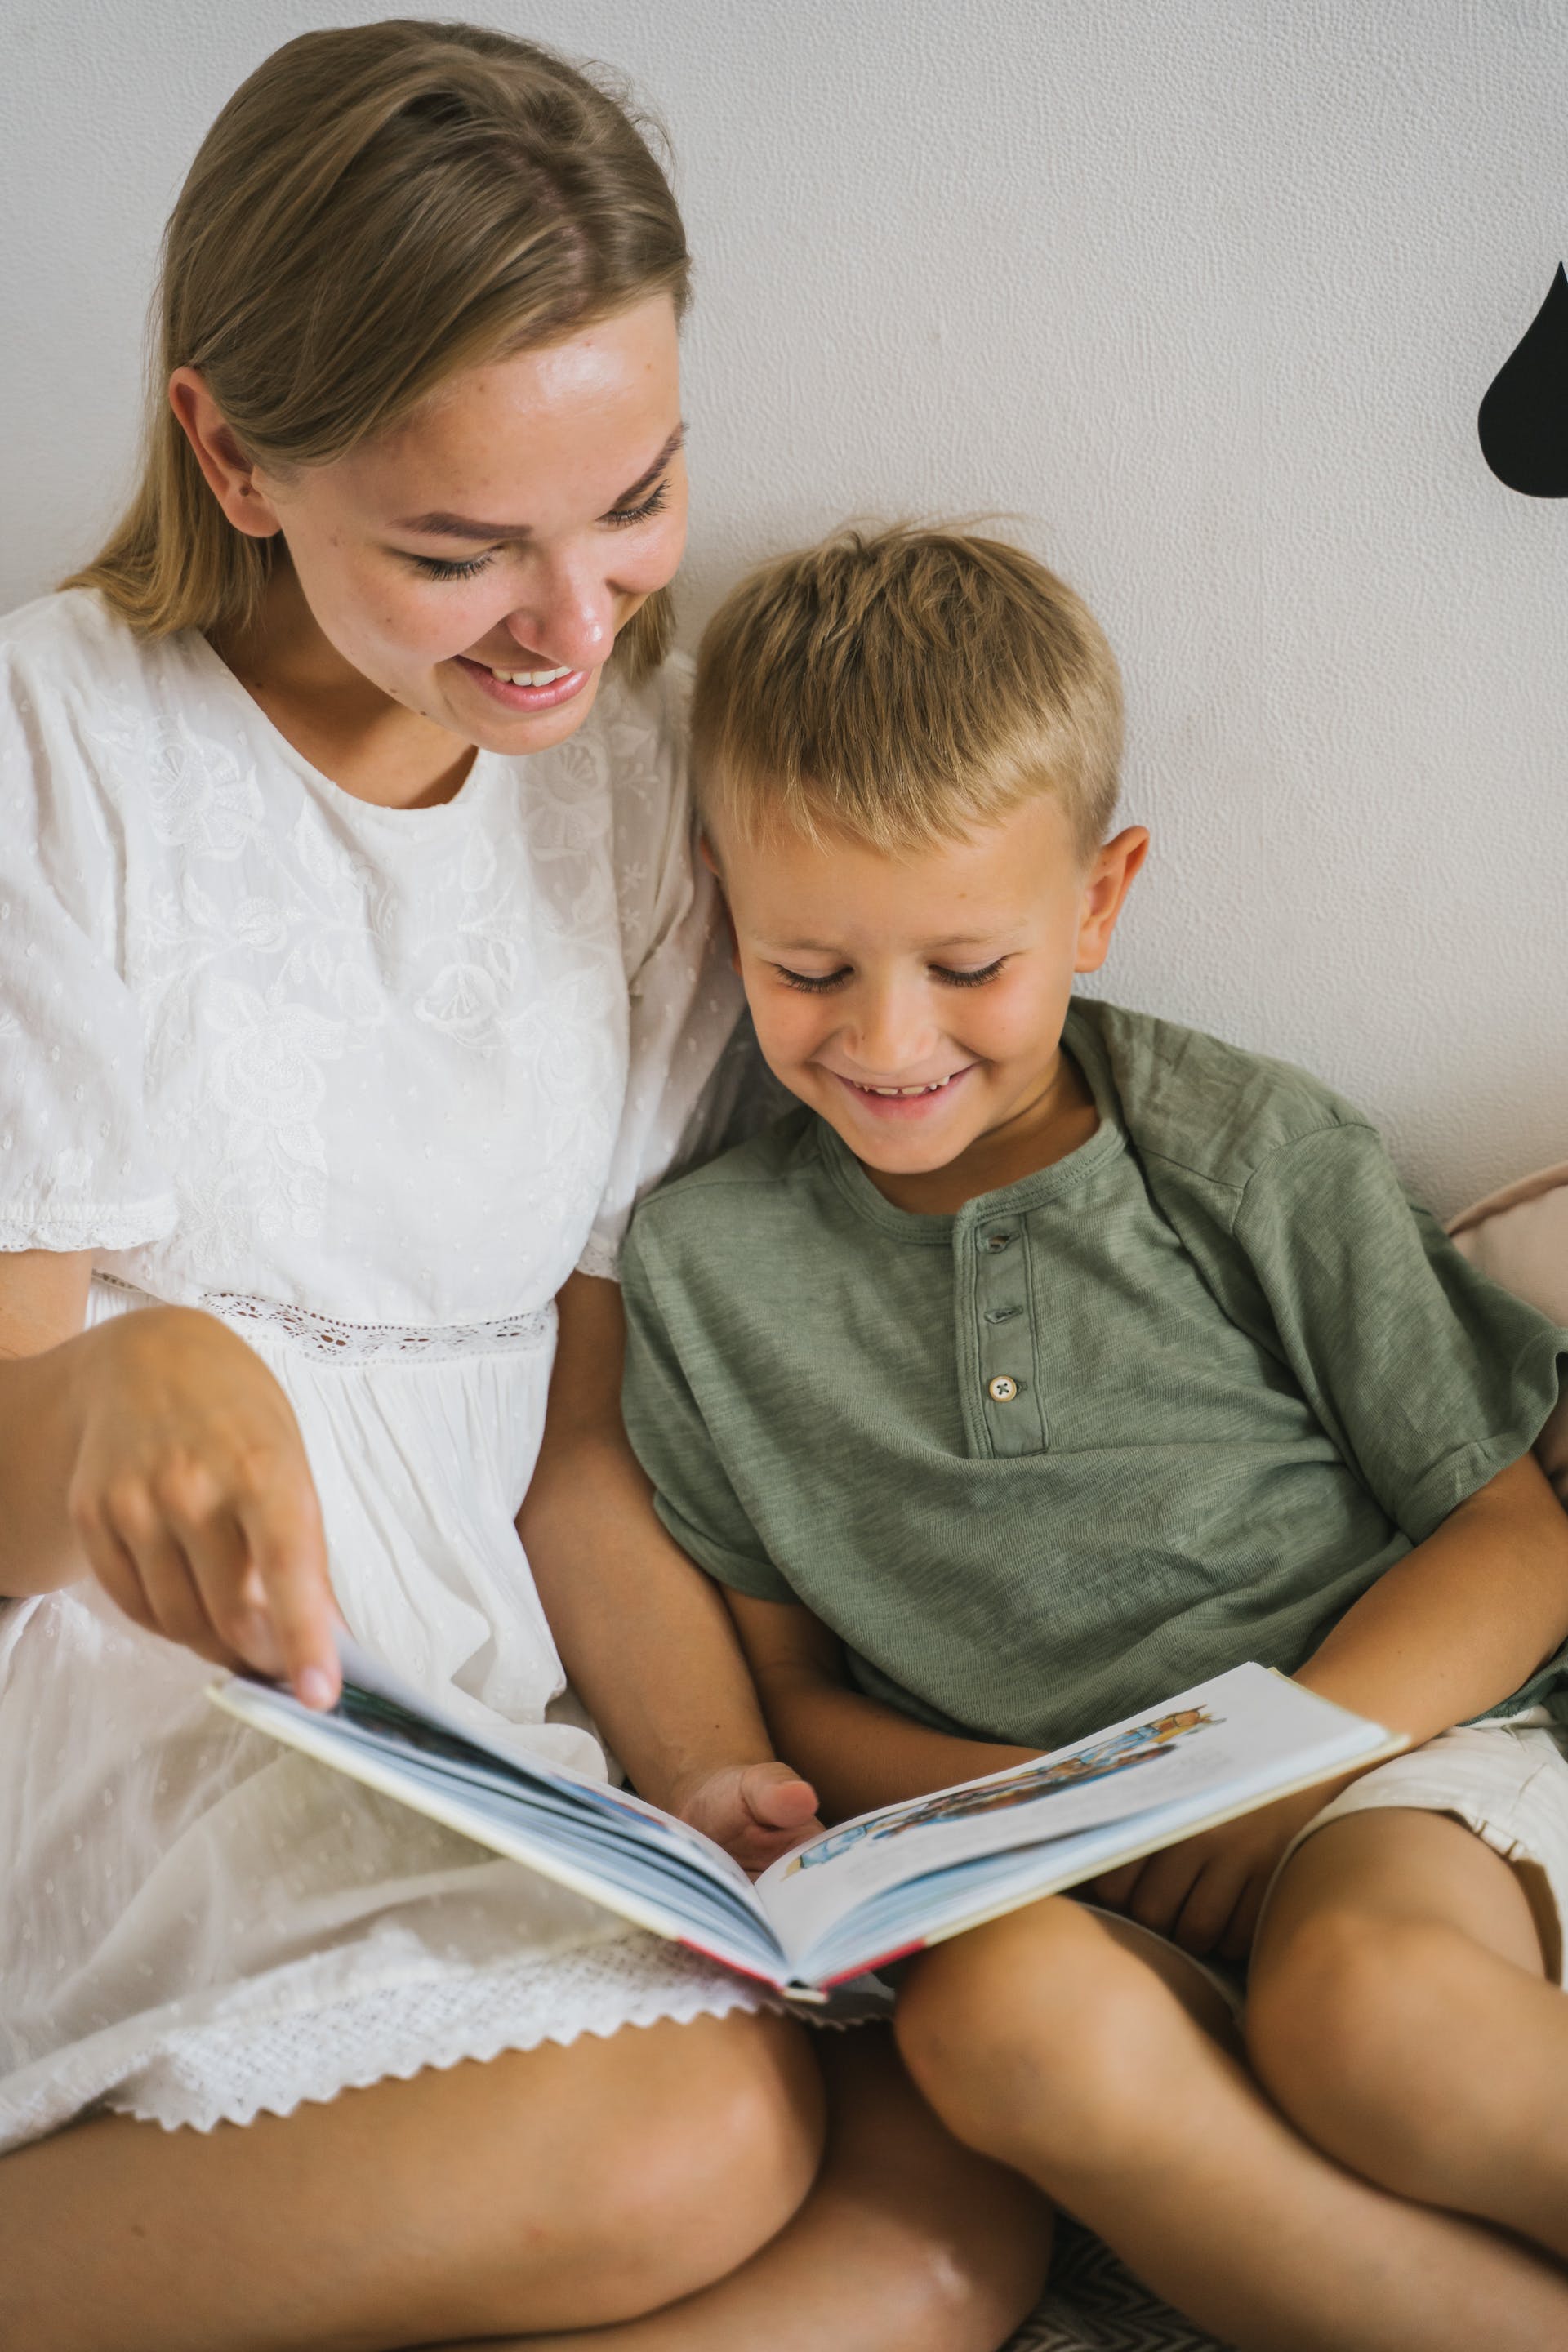 Mother reading a book with her son | Source: Pexels